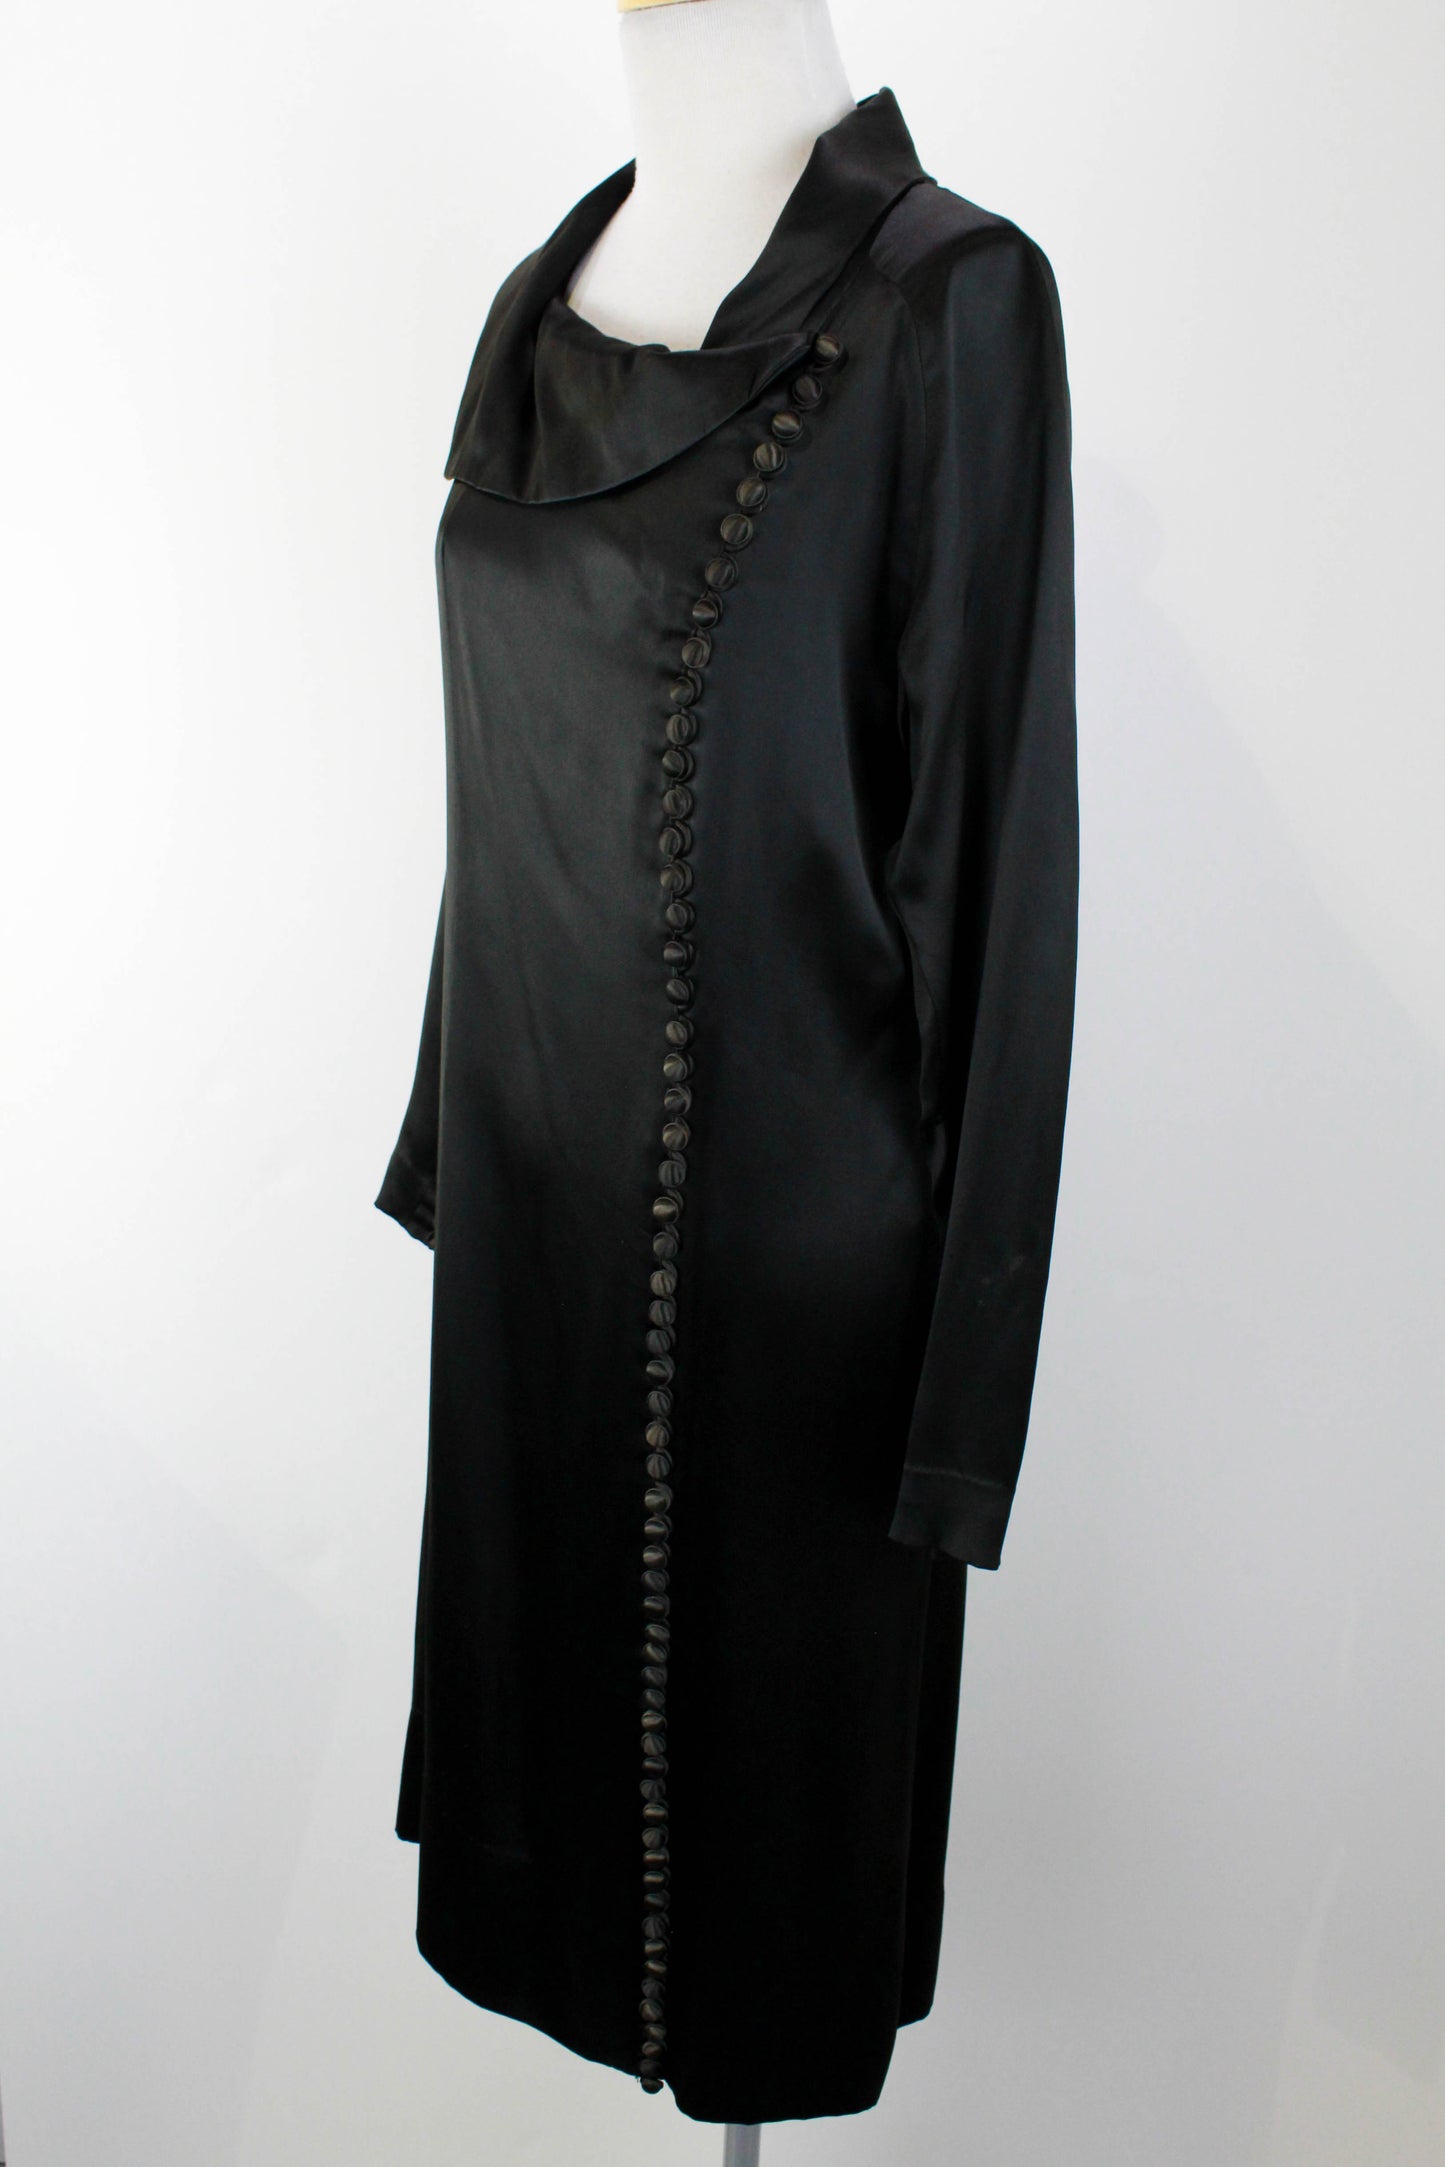 1930s silk satin black dress, art deco 30s vintage dress long sleeves covered buttons ian drummond collection 